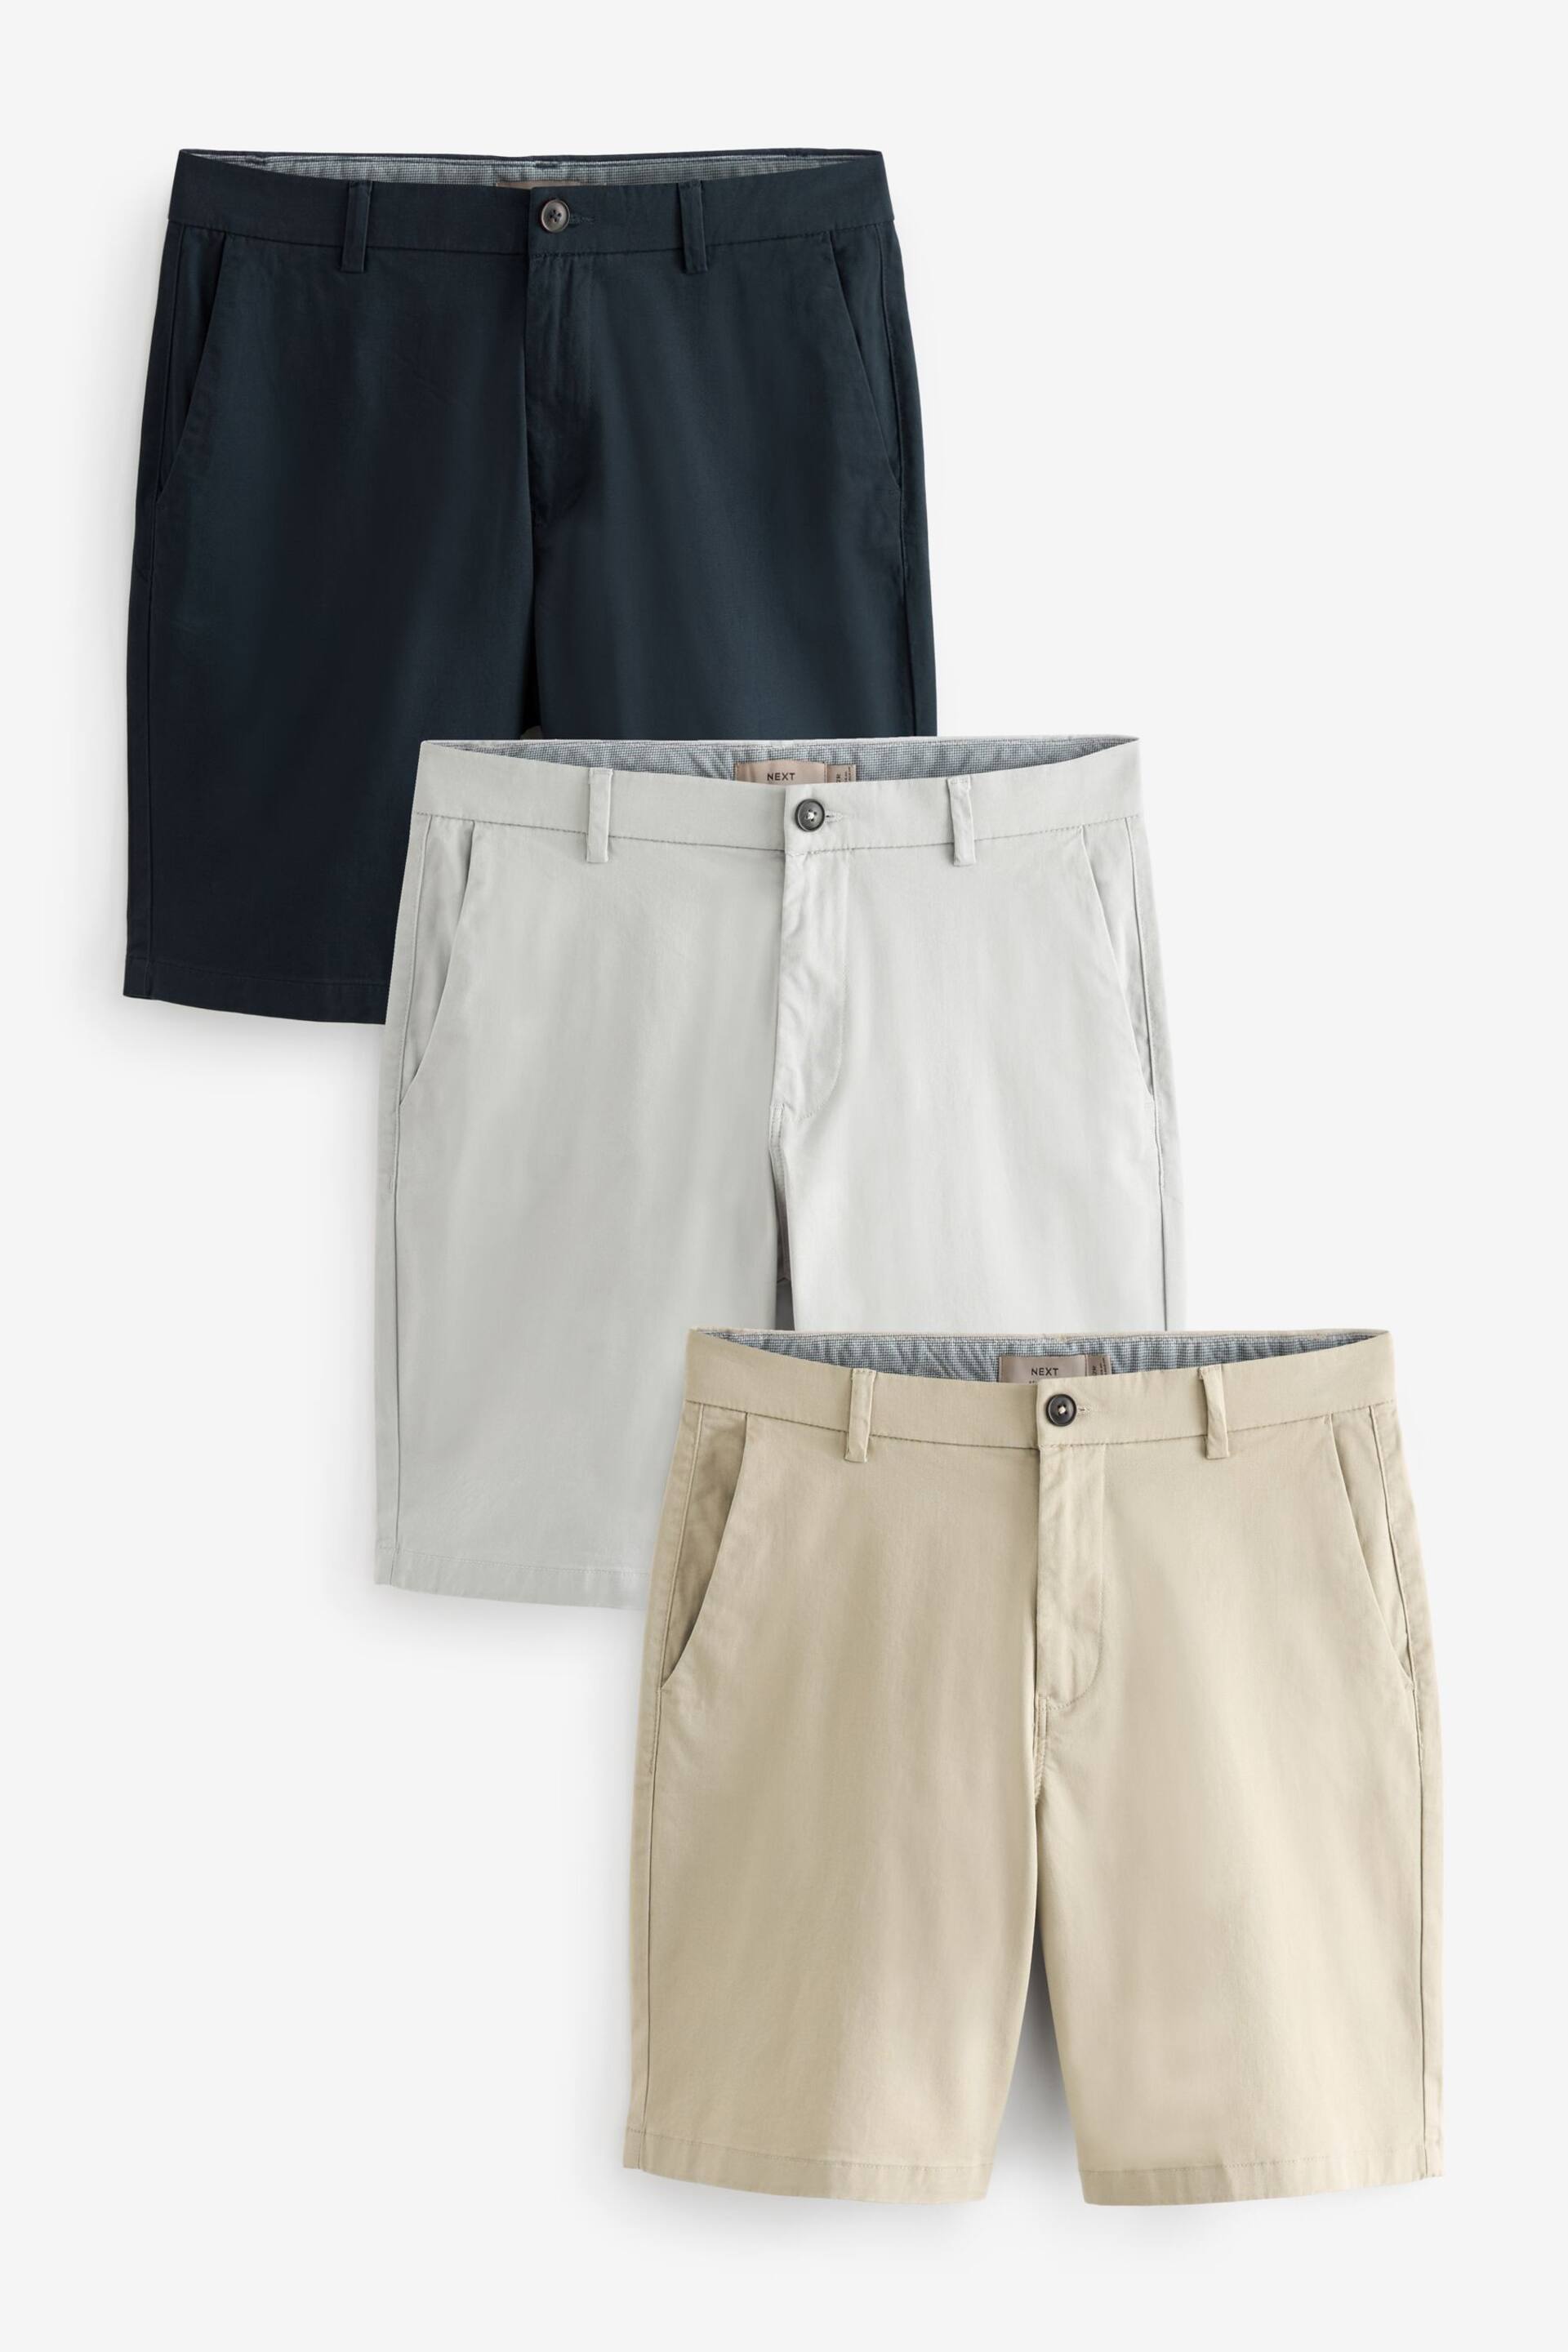 Navy Blue/Grey/Stone Loose Stretch Chinos Shorts 3 Pack - Image 1 of 15